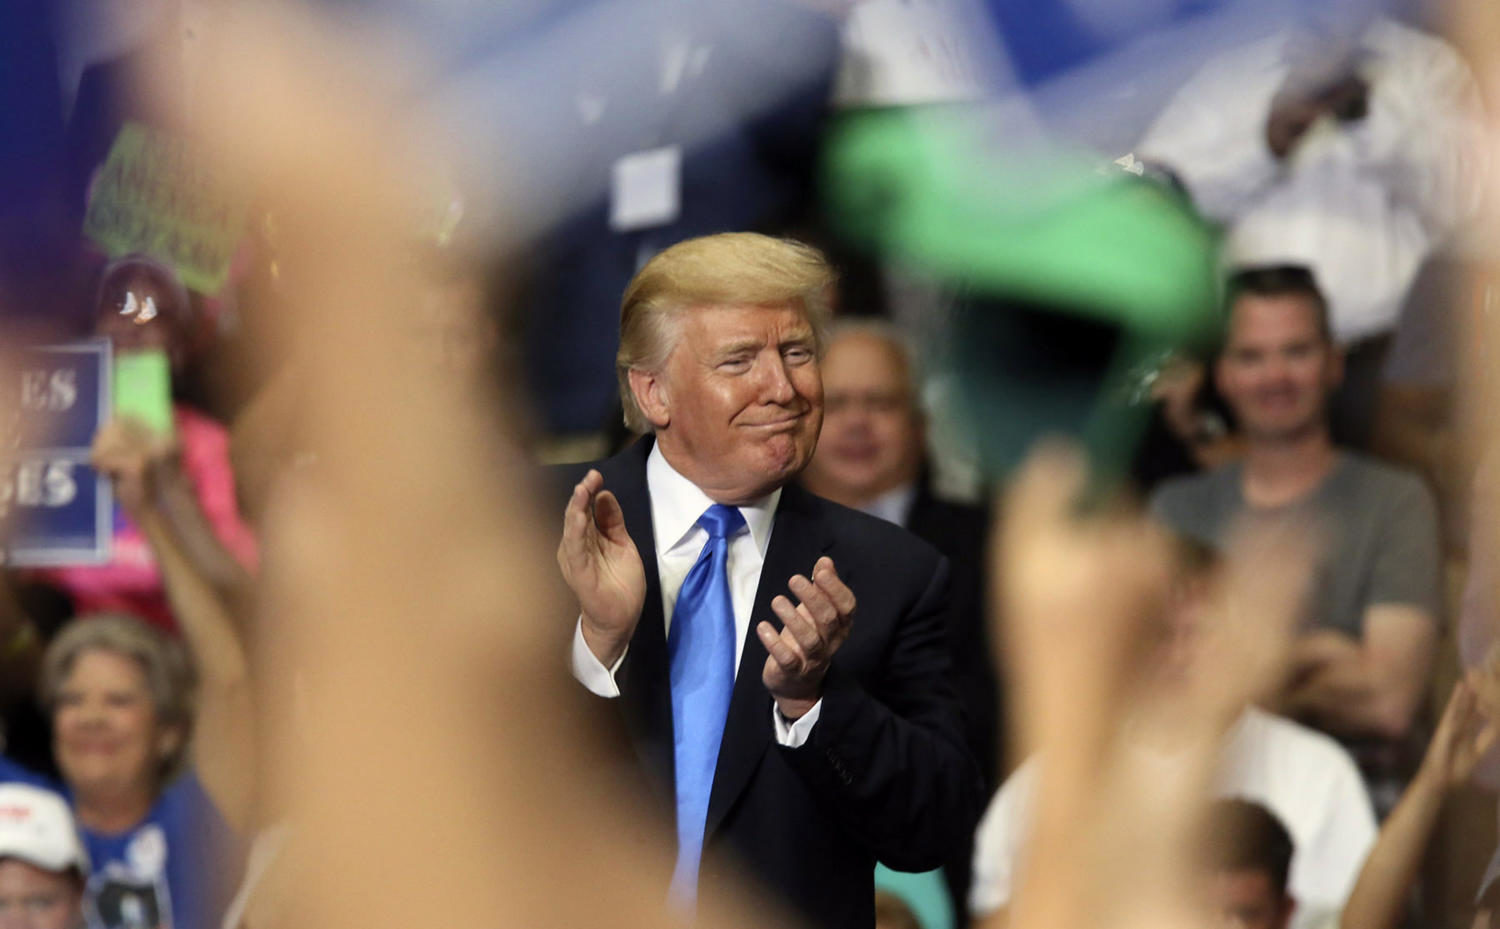 President Donald Trump joins in clapping as he basks in the applause at a Make America Great Again rally at the Covelli Centre in Youngstown, Ohio, on July 25, 2017. 